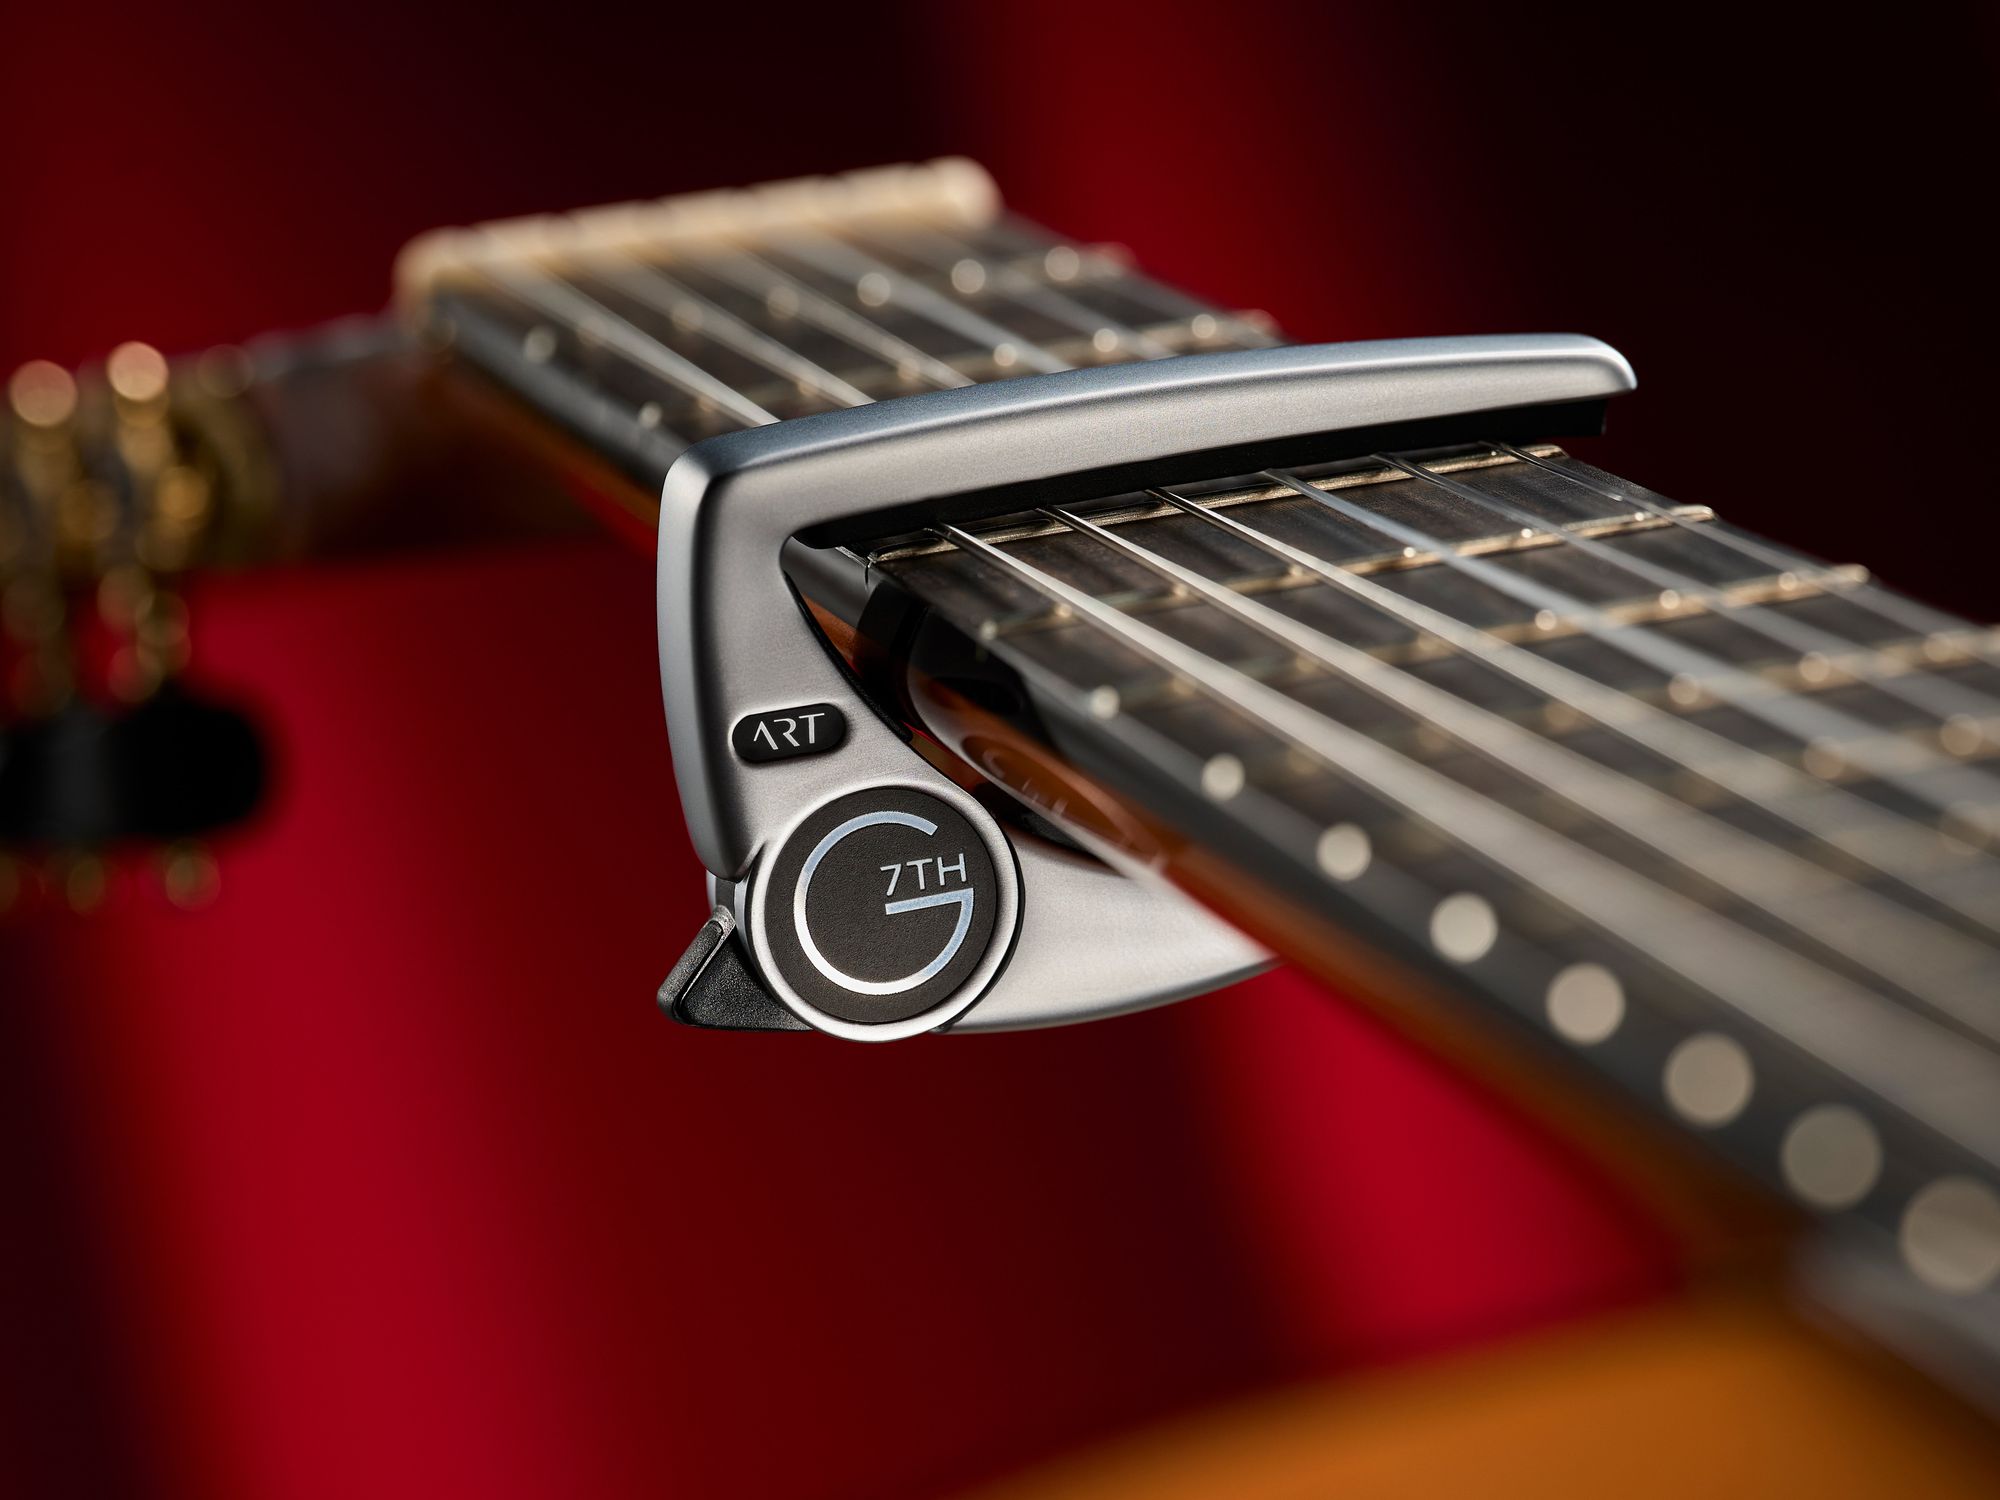 G7th Introduces Performance 3 Capo for Classical Guitars - Premier Guitar